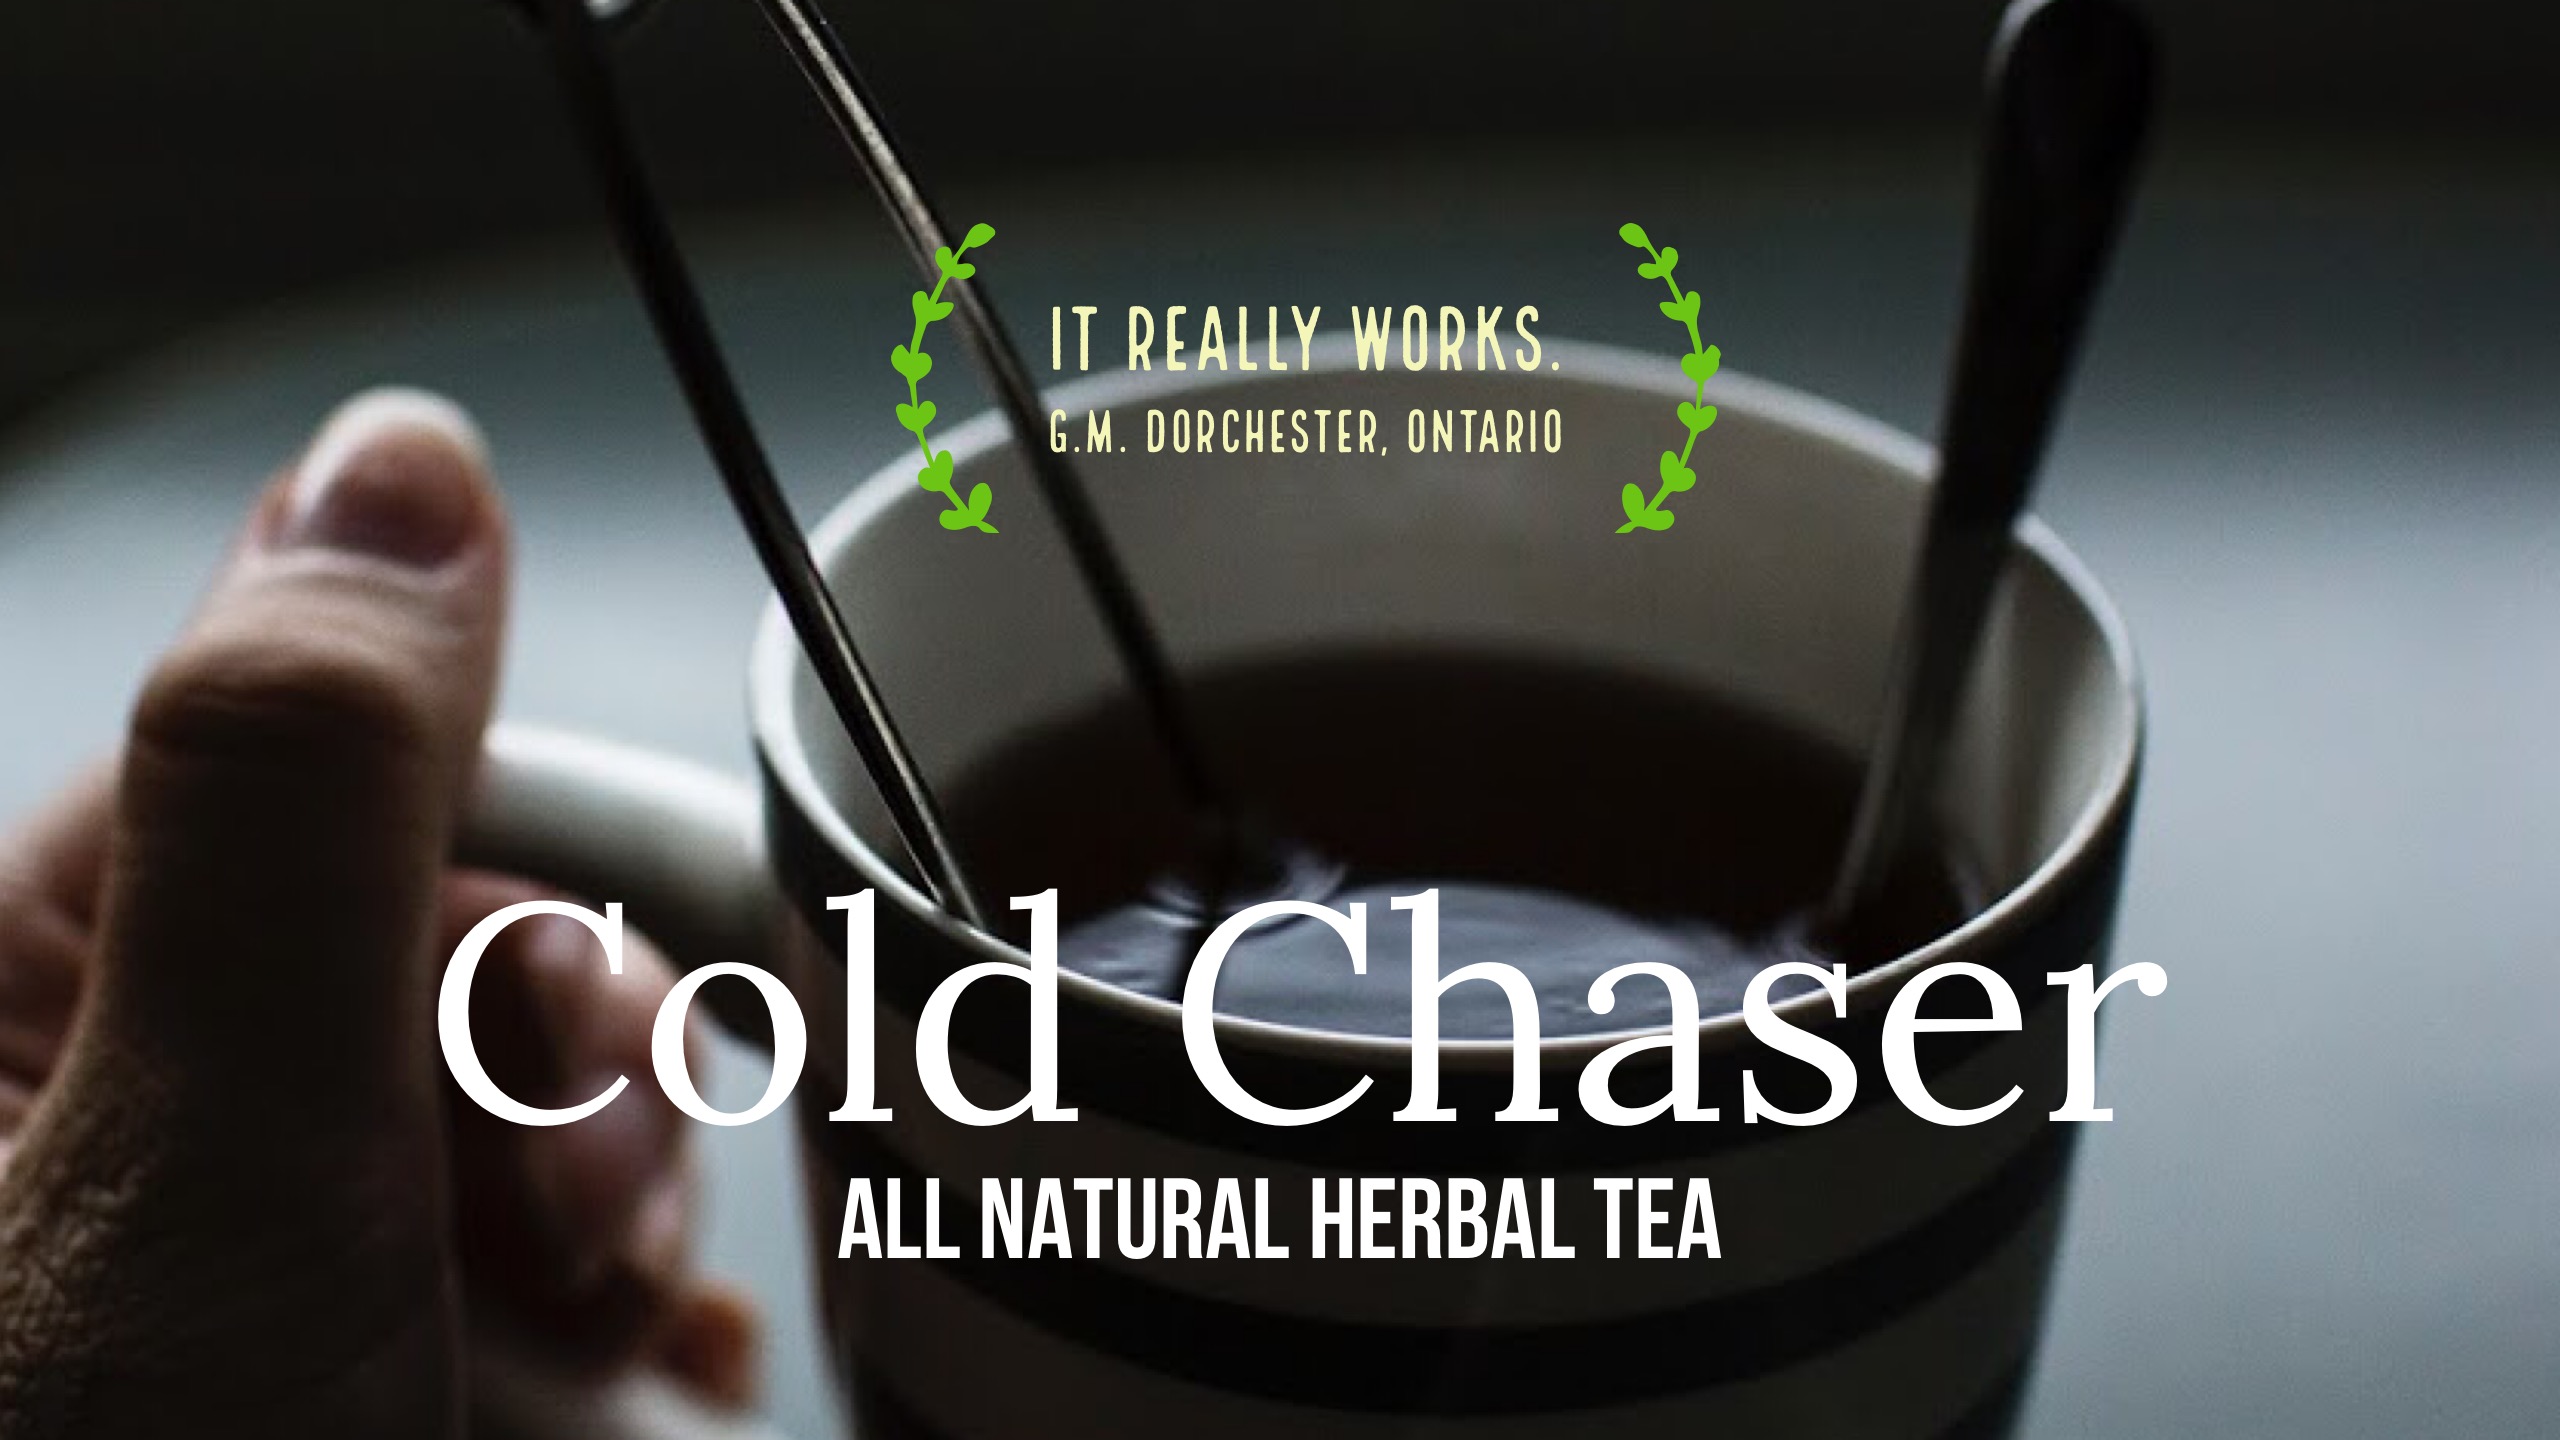 Cold chaser tea blend from Distinctly Tea Inc